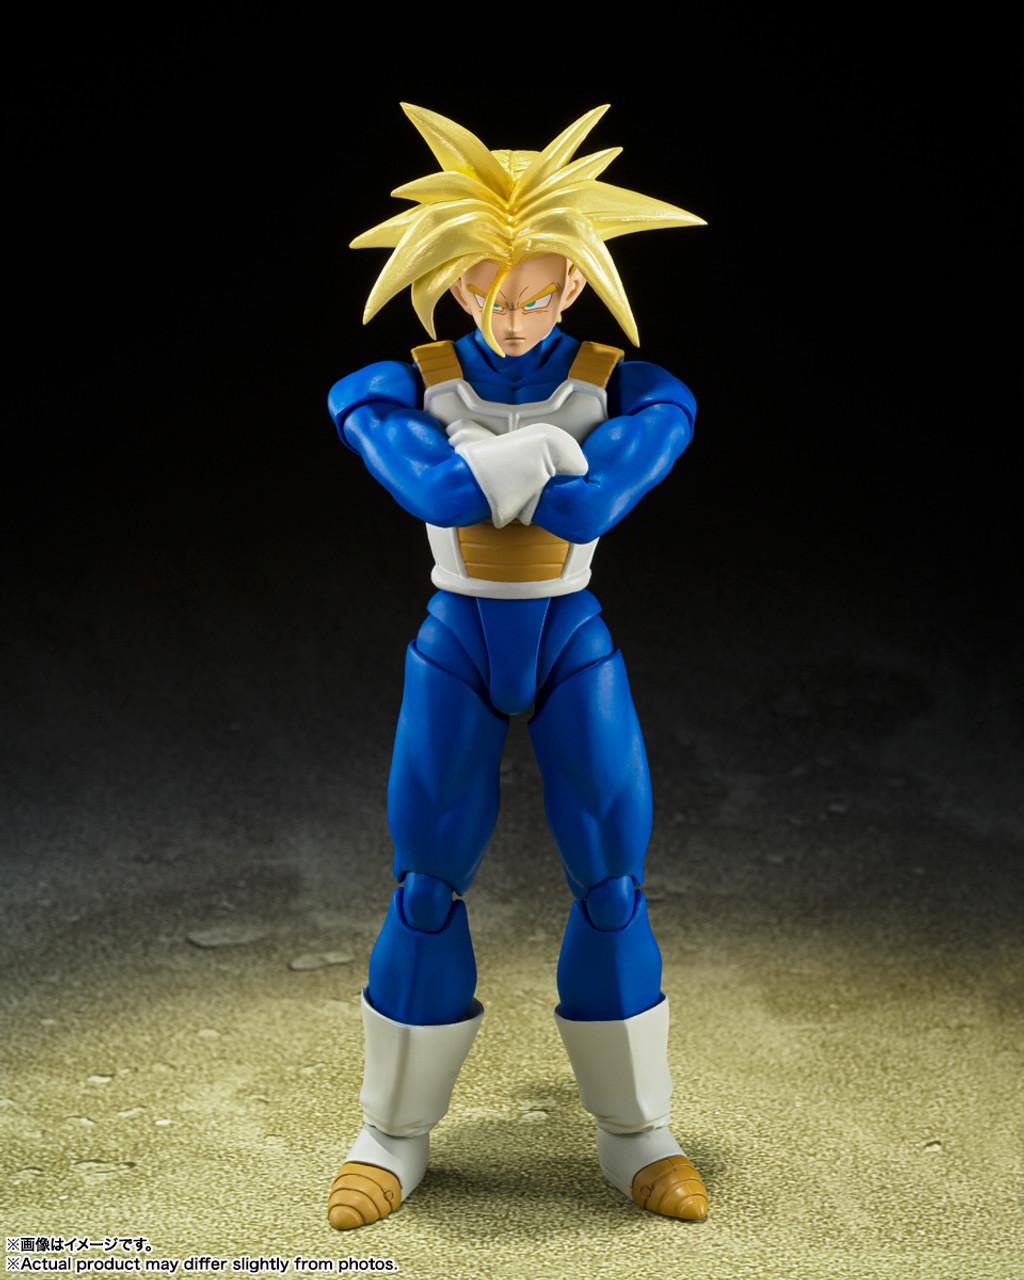 Goku's Effect Parts Set Debuts in the S.H.Figuarts Series